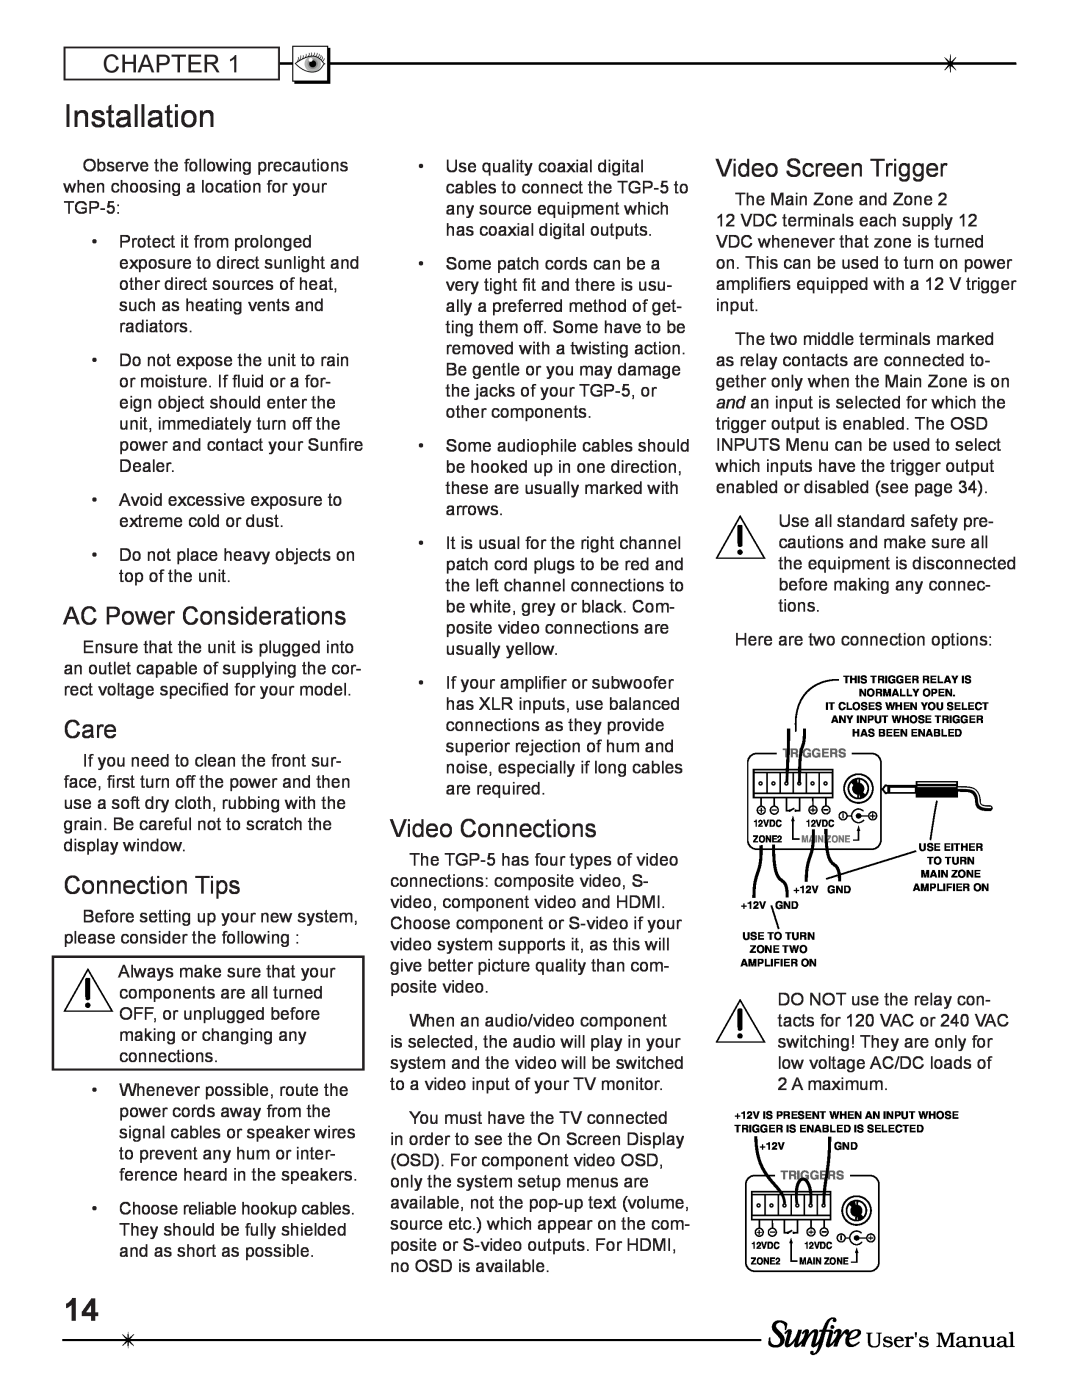 Sunfire TGP-5 manual Installation, Chapter, AC Power Considerations, Care, Connection Tips, Video Connections, Users Manual 